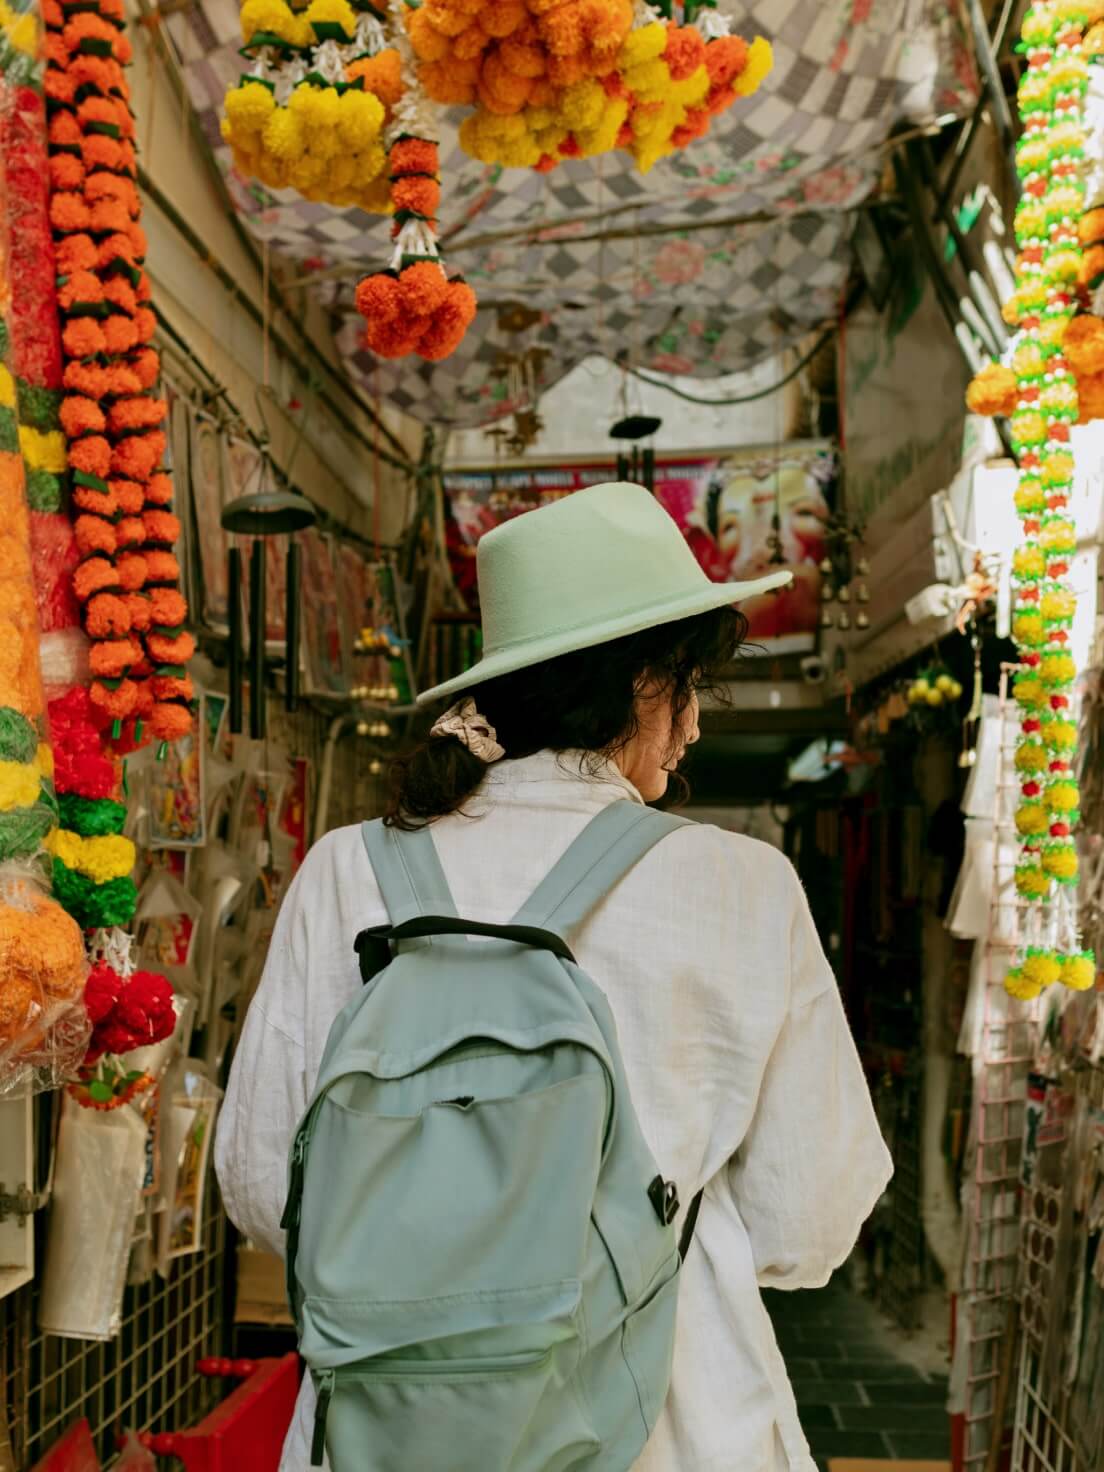 A traveller walking in a local market using a travel money card 